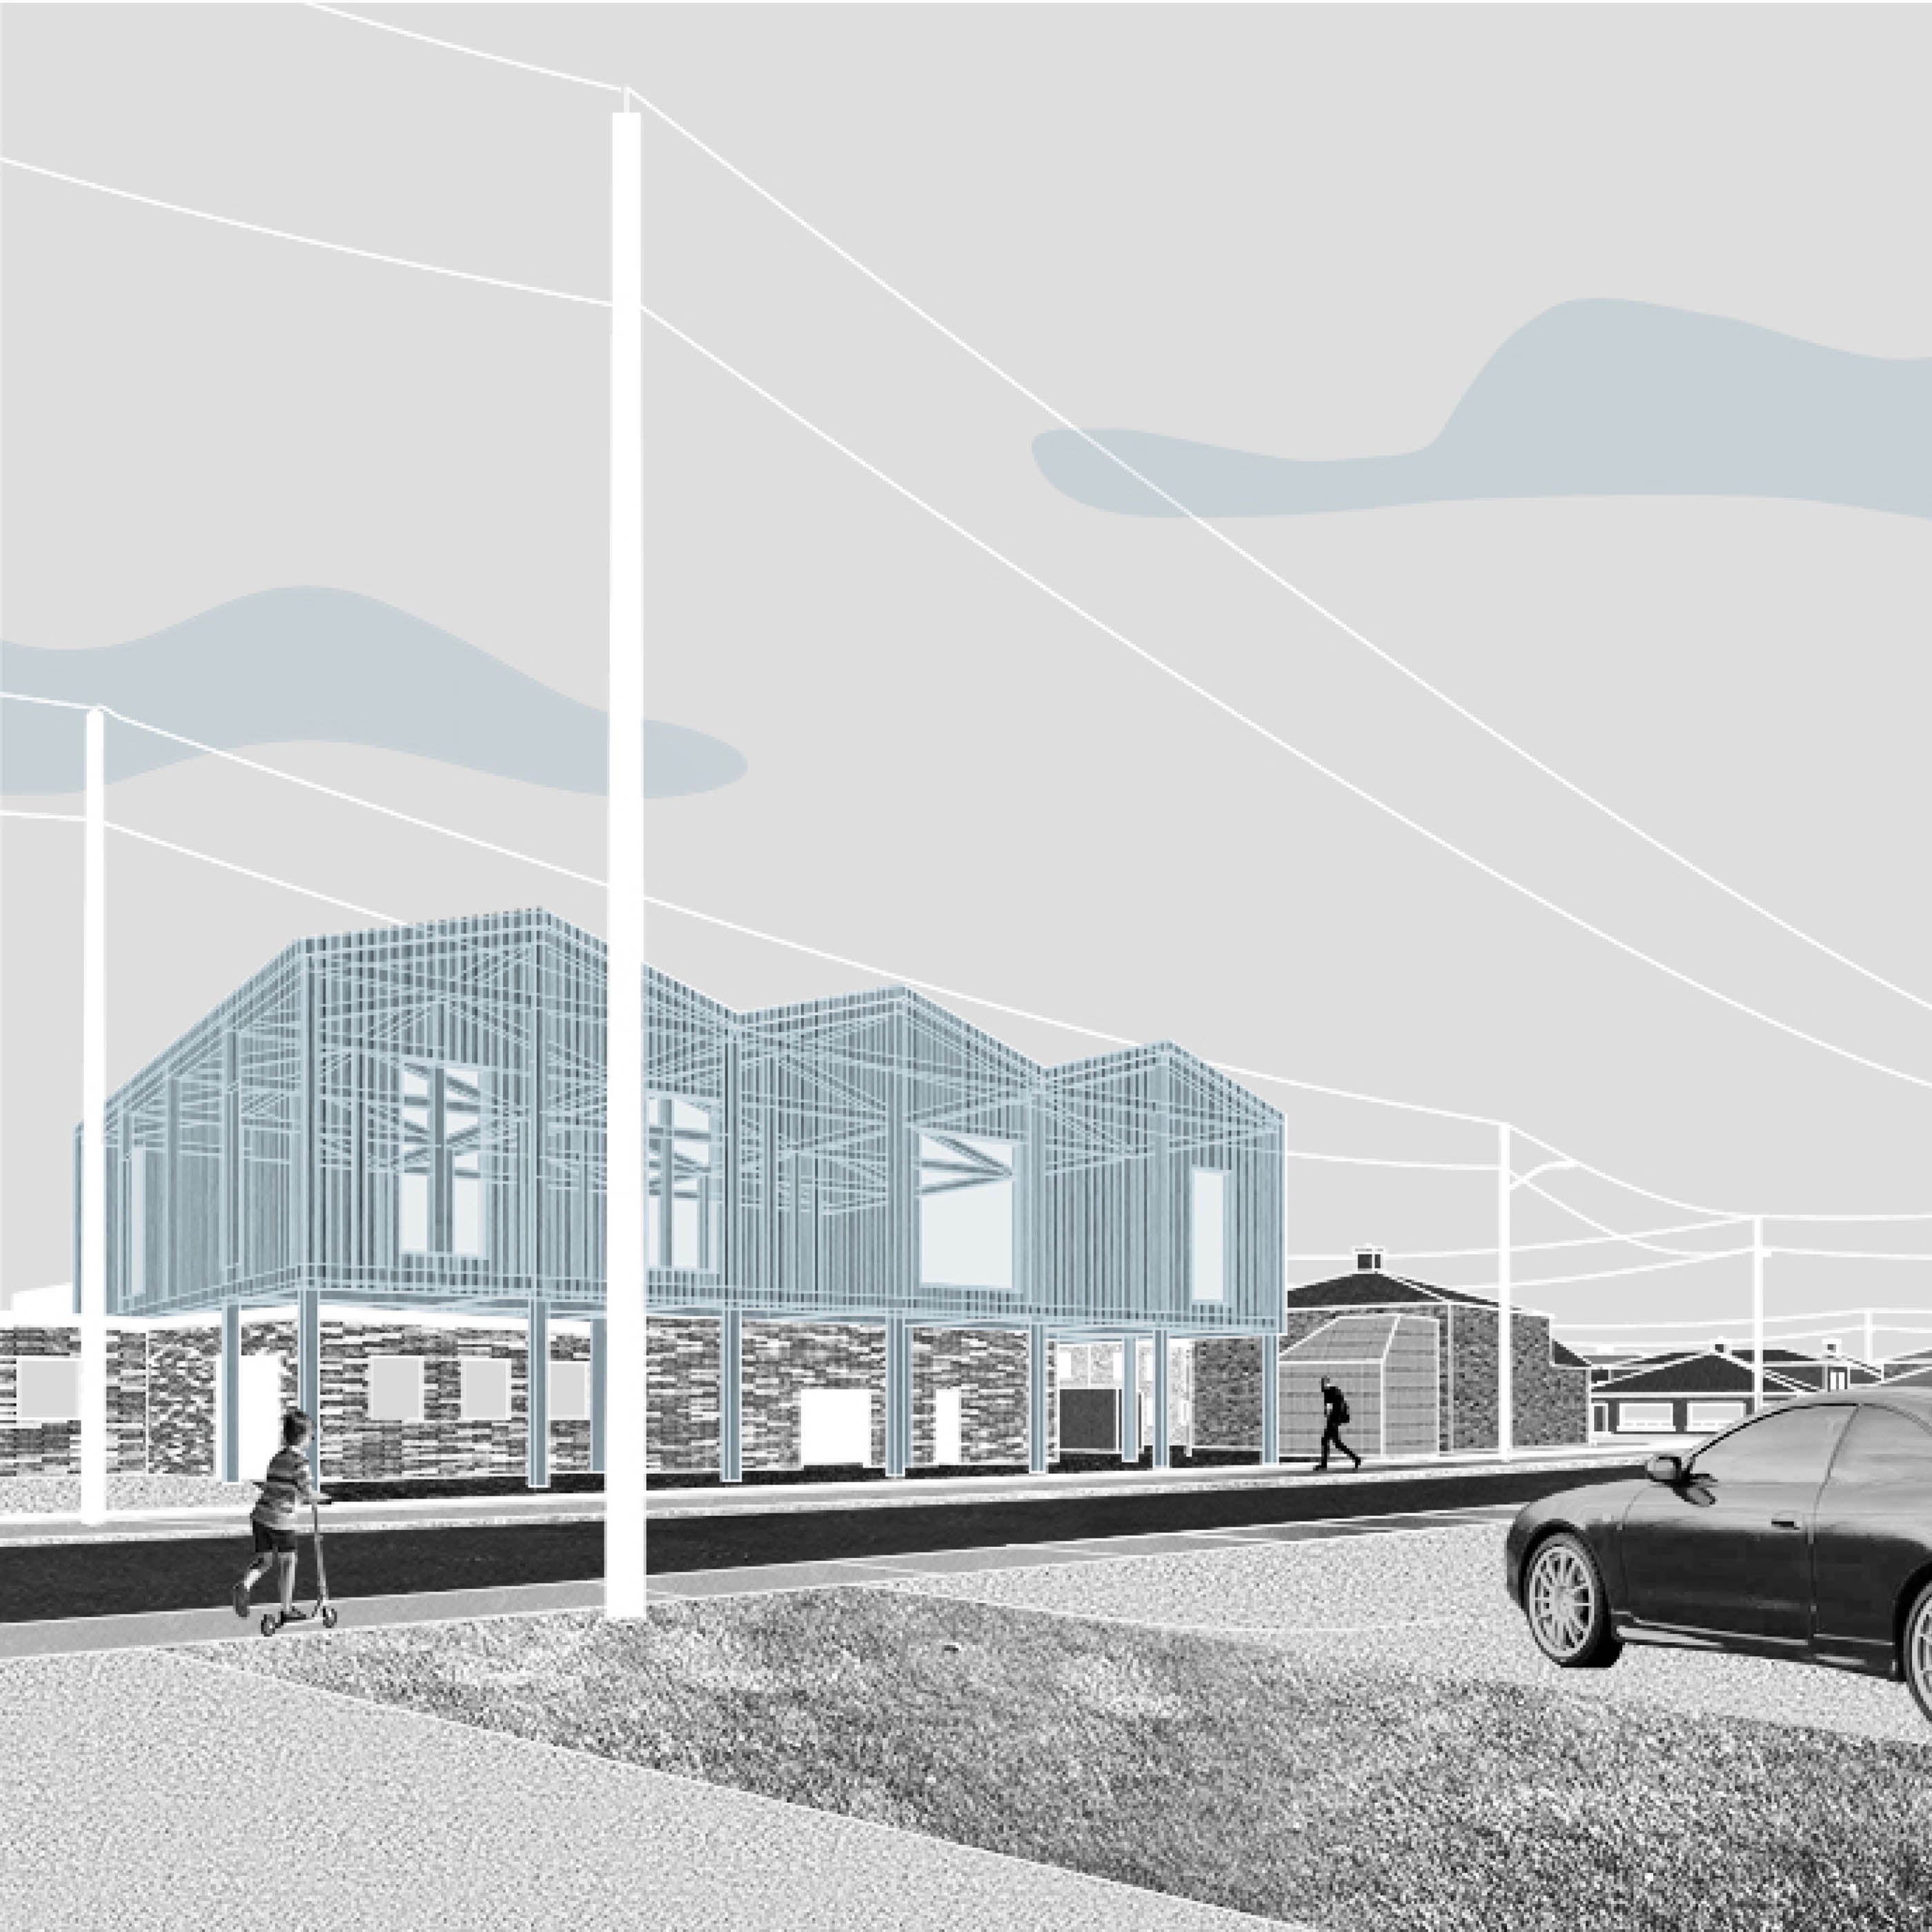 Rendering of a street view illustrated houses